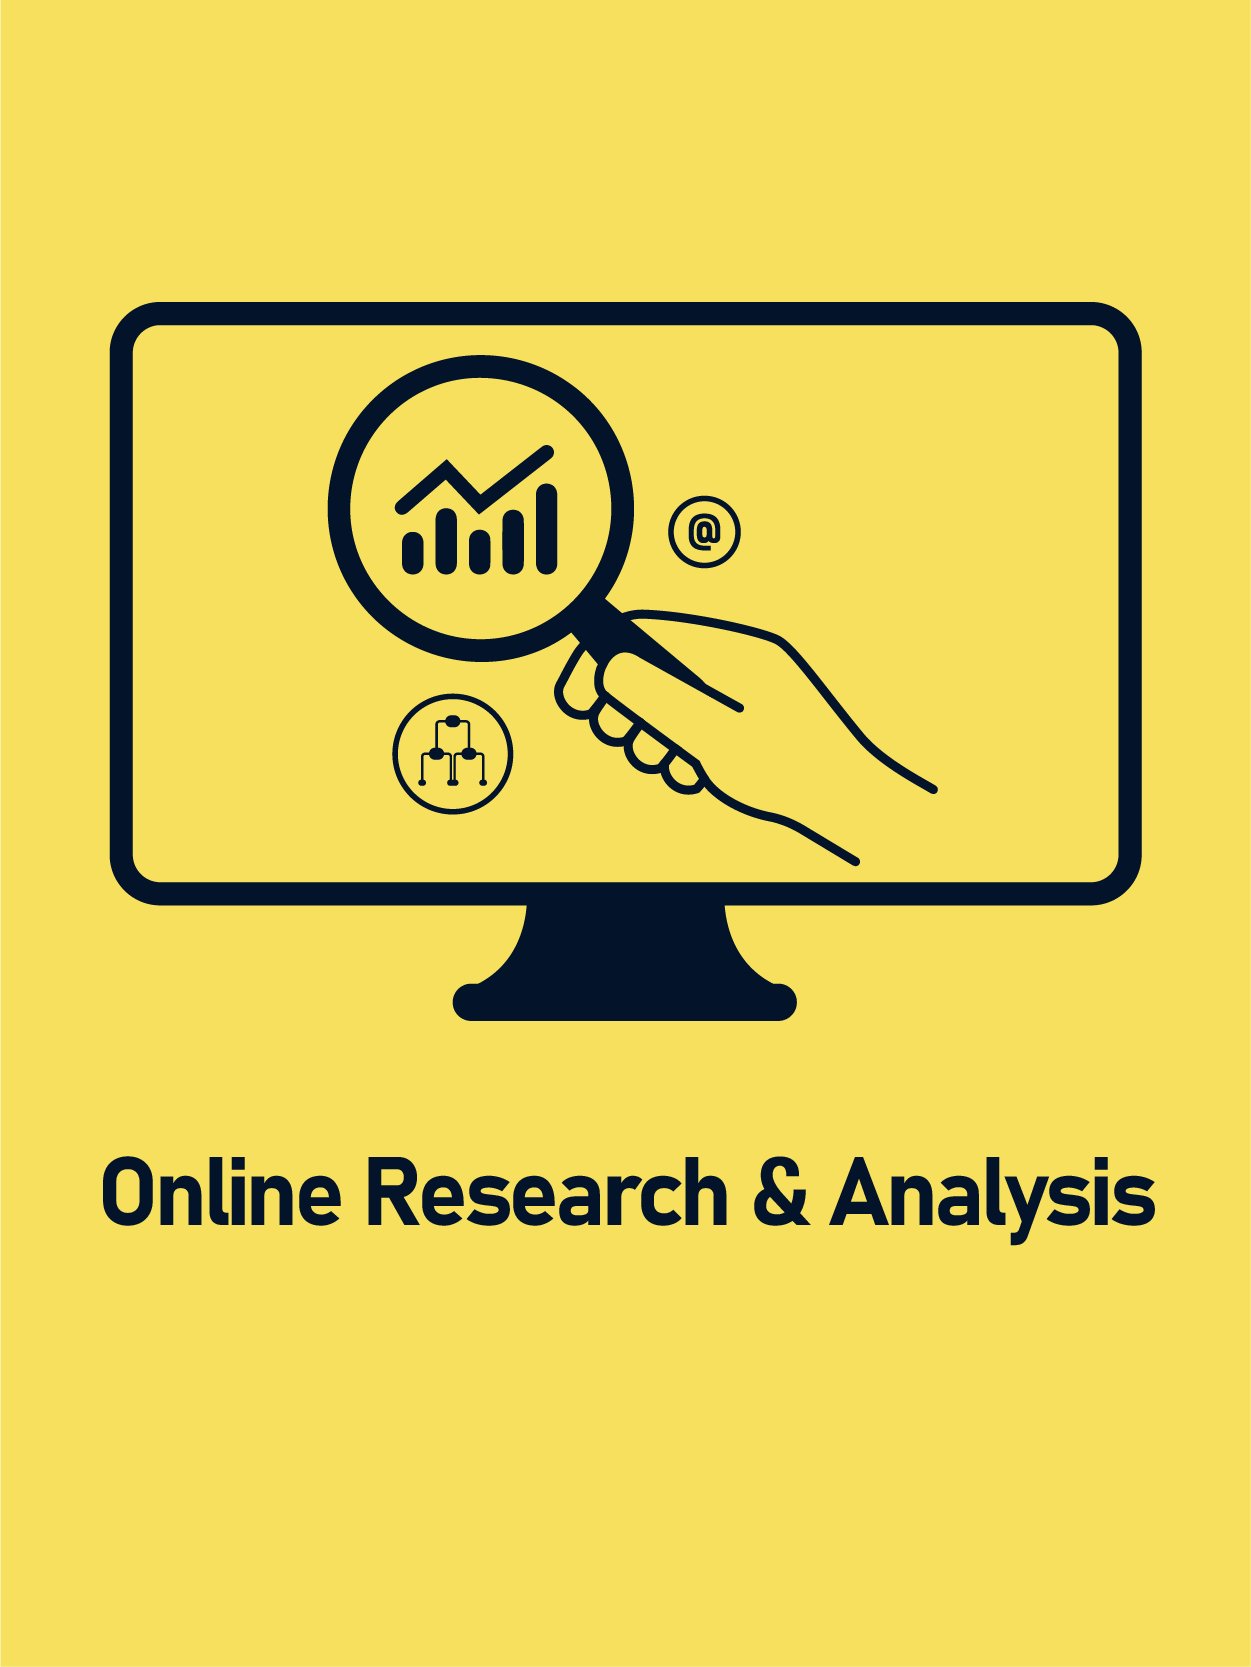 online research